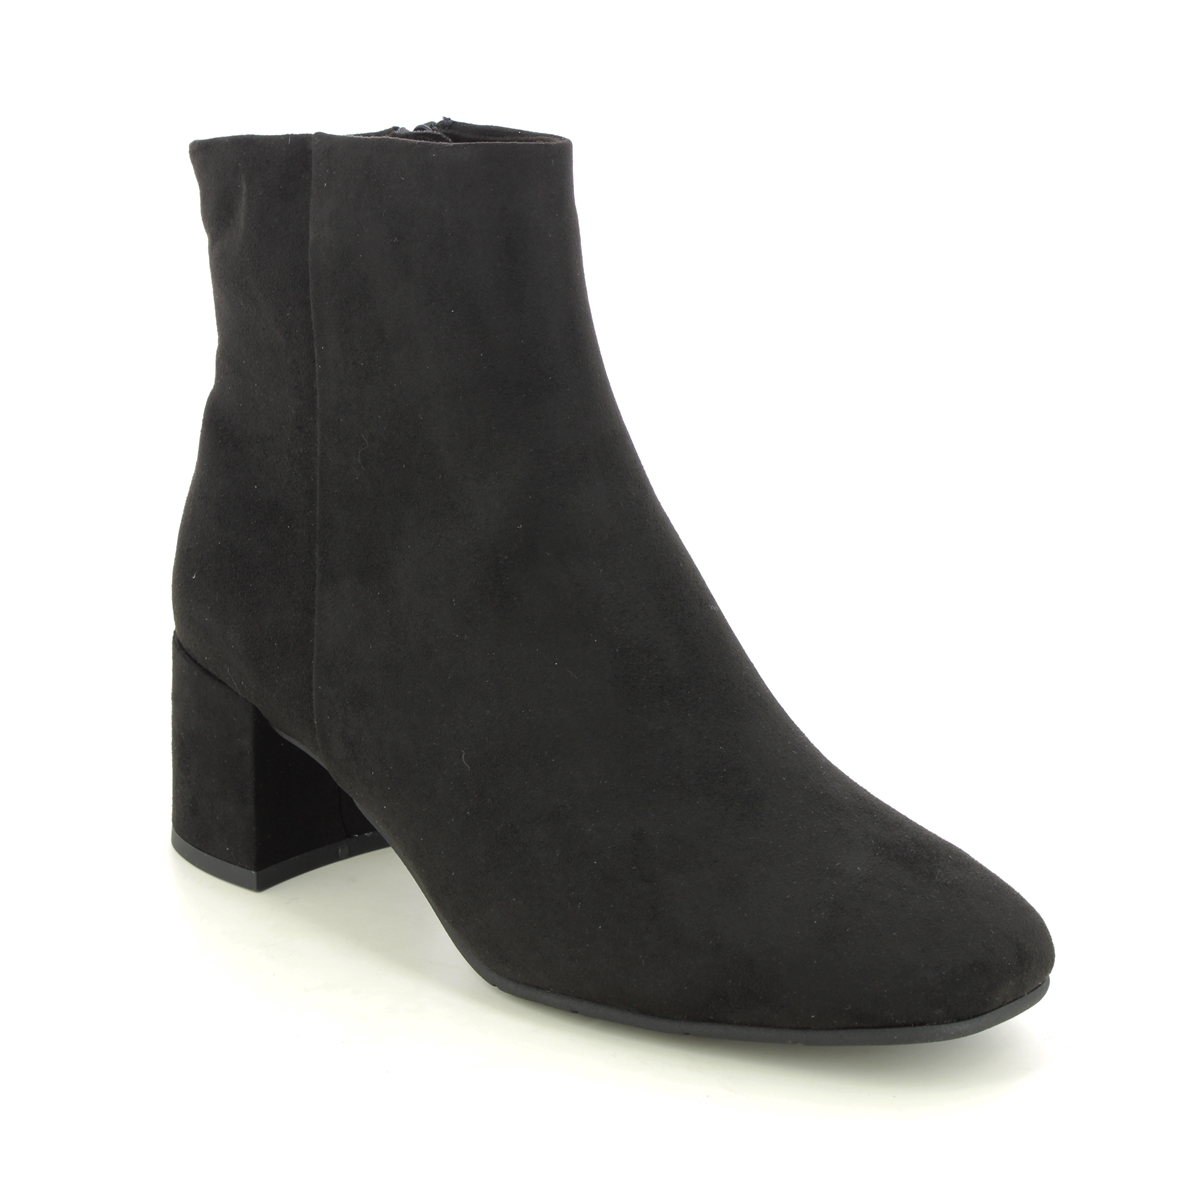 Marco Tozzi Vacco Black Womens Heeled Boots 25349-41-001 In Size 41 In Plain Black